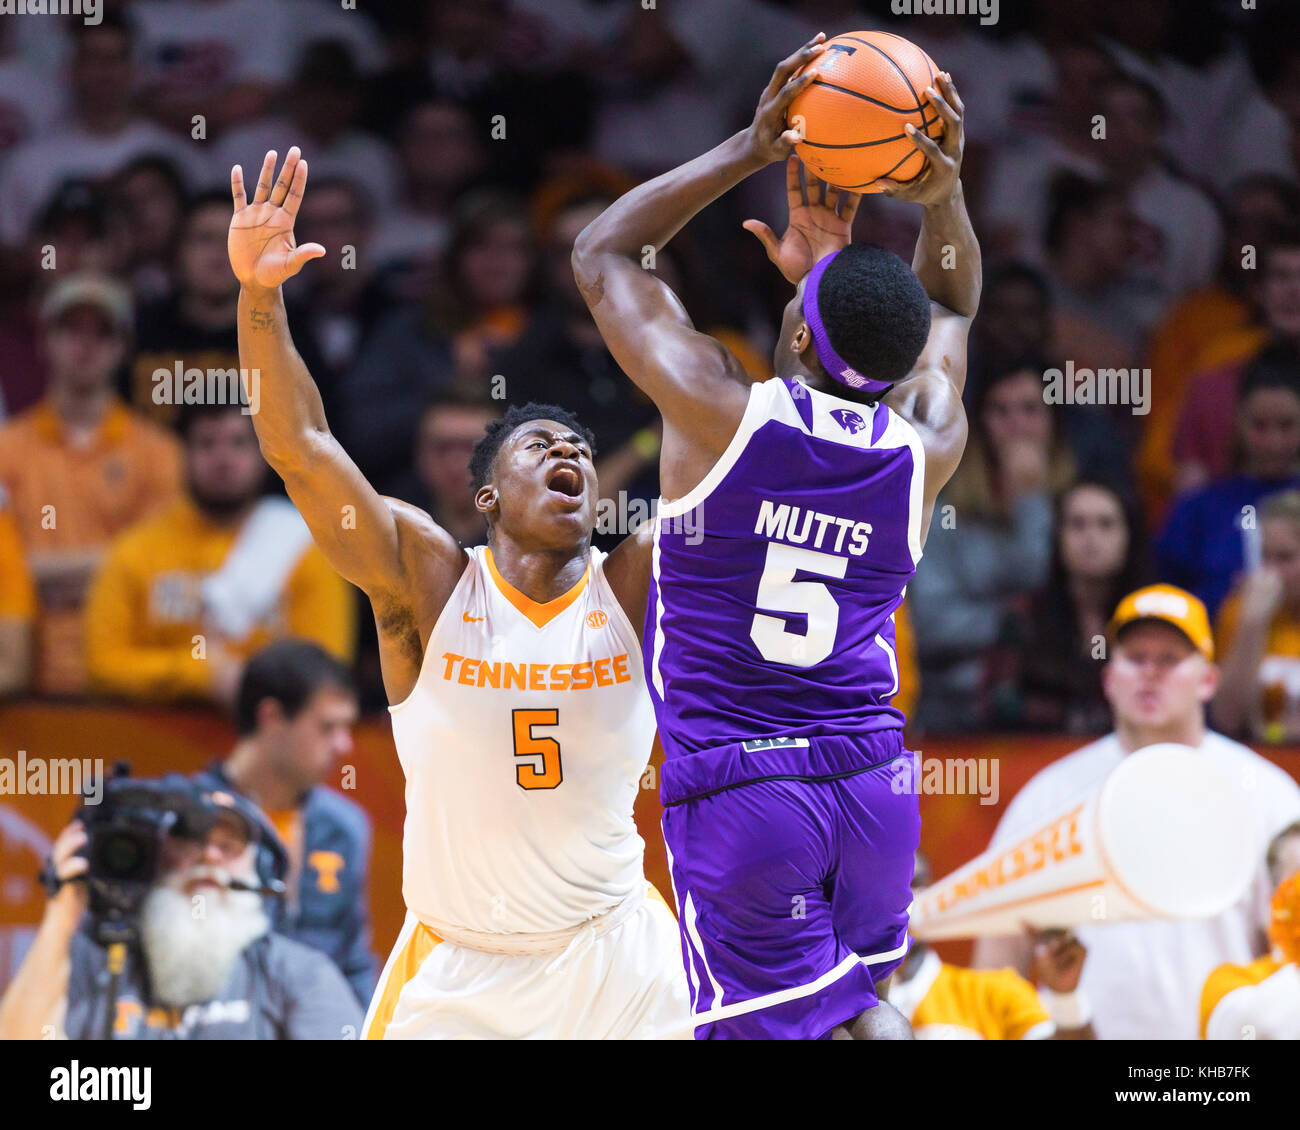 University of Tennessee, Tennessee November 14, 2017: Justyn Mutts #5 of the High Point Panthers shoots the ball over Admiral Schofield #5 of the Tennessee Volunteers during the NCAA basketball game between the University of Tennessee Volunteers and the High Point University Panthers at Thompson Boling Arena in Knoxville TN Tim Gangloff/CSM Stock Photo